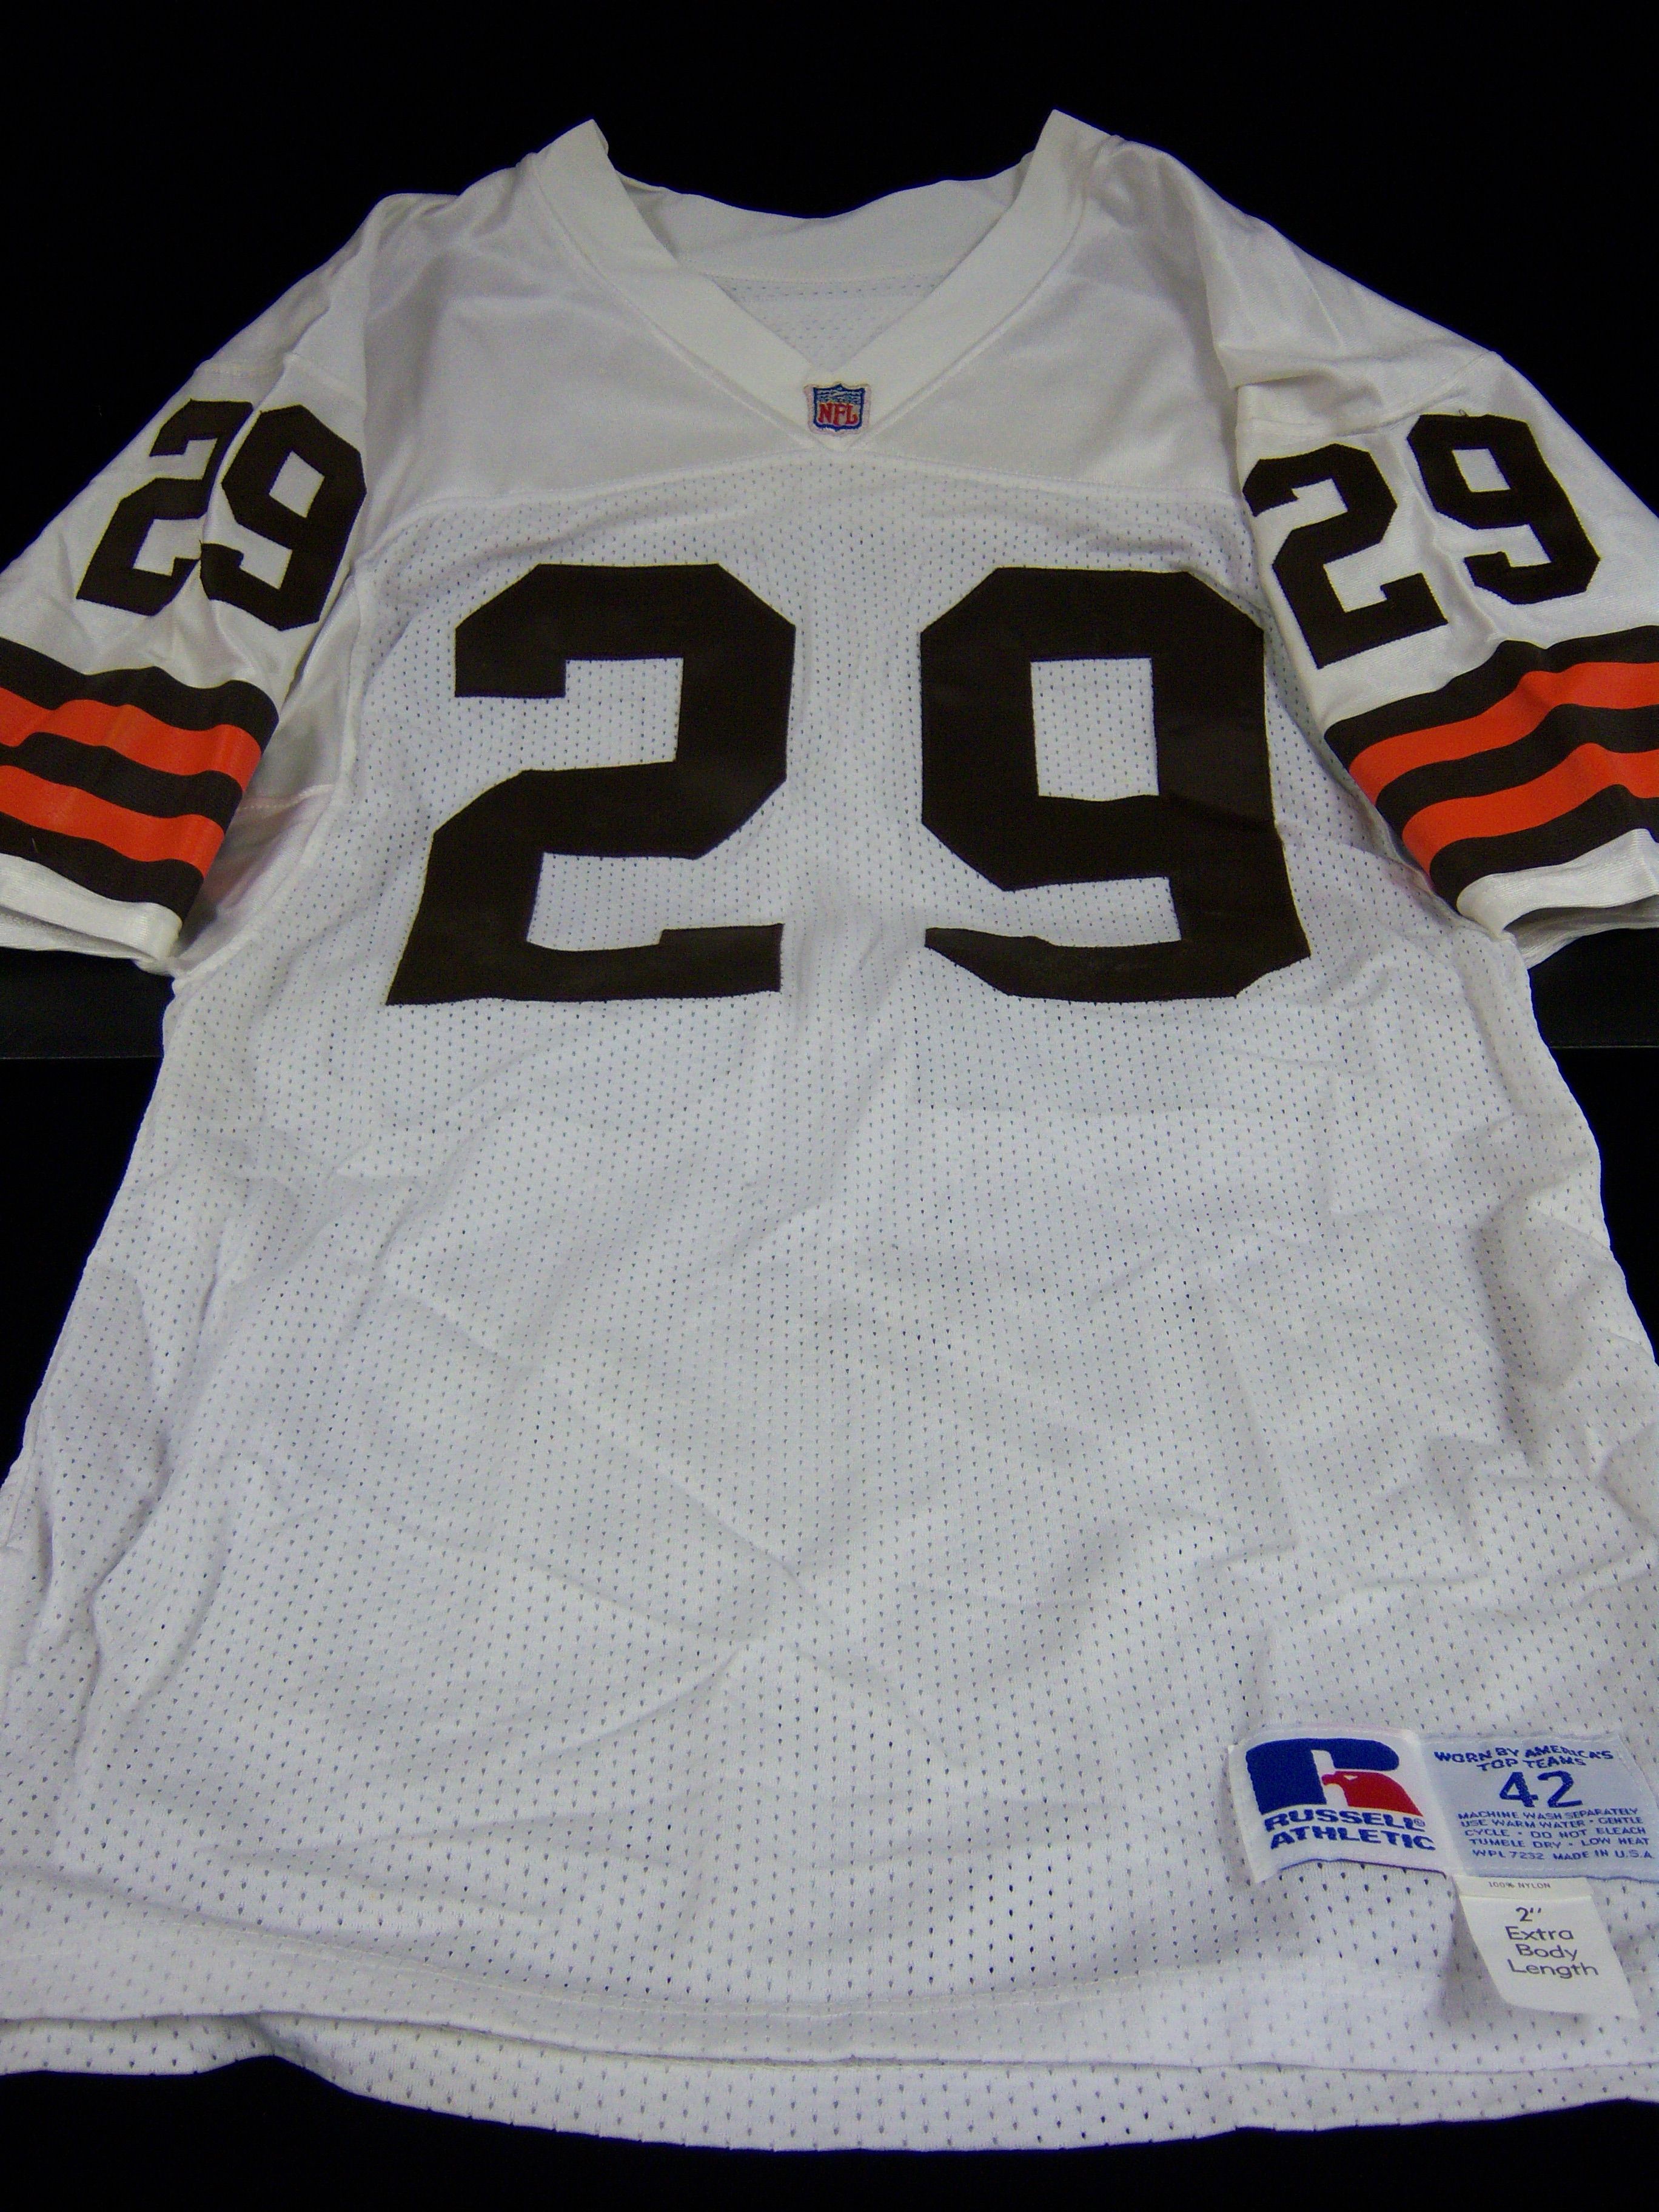 Hanford Dixon Signed Cleveland Browns Jersey (Playball Ink Holo) 3xPro Bowl  D.B